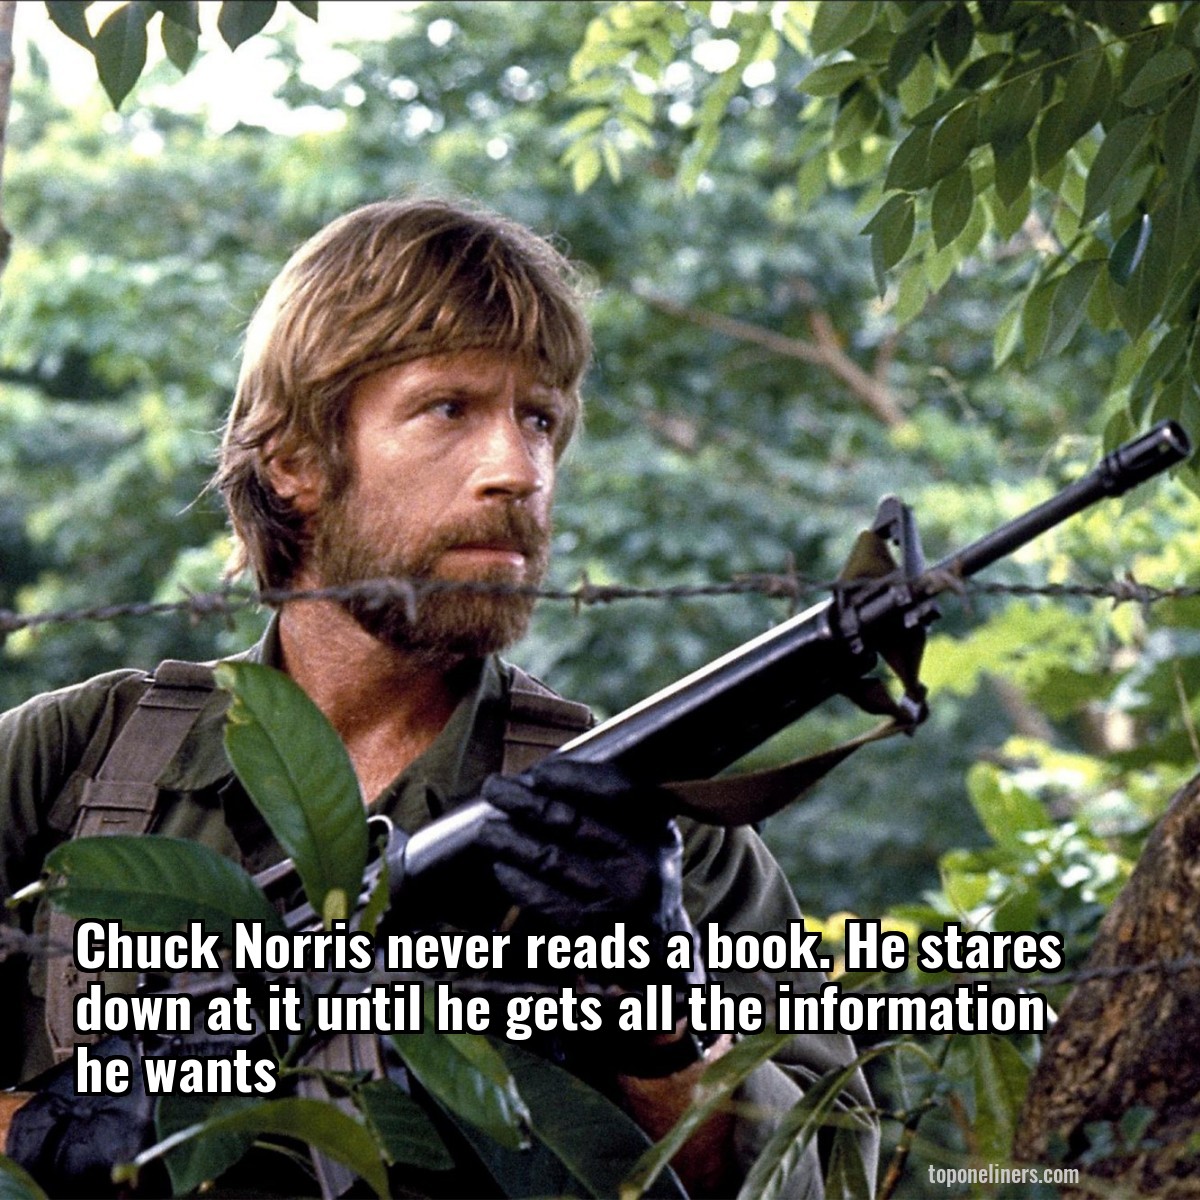 Chuck Norris never reads a book. He stares down at it until he gets all the information he wants